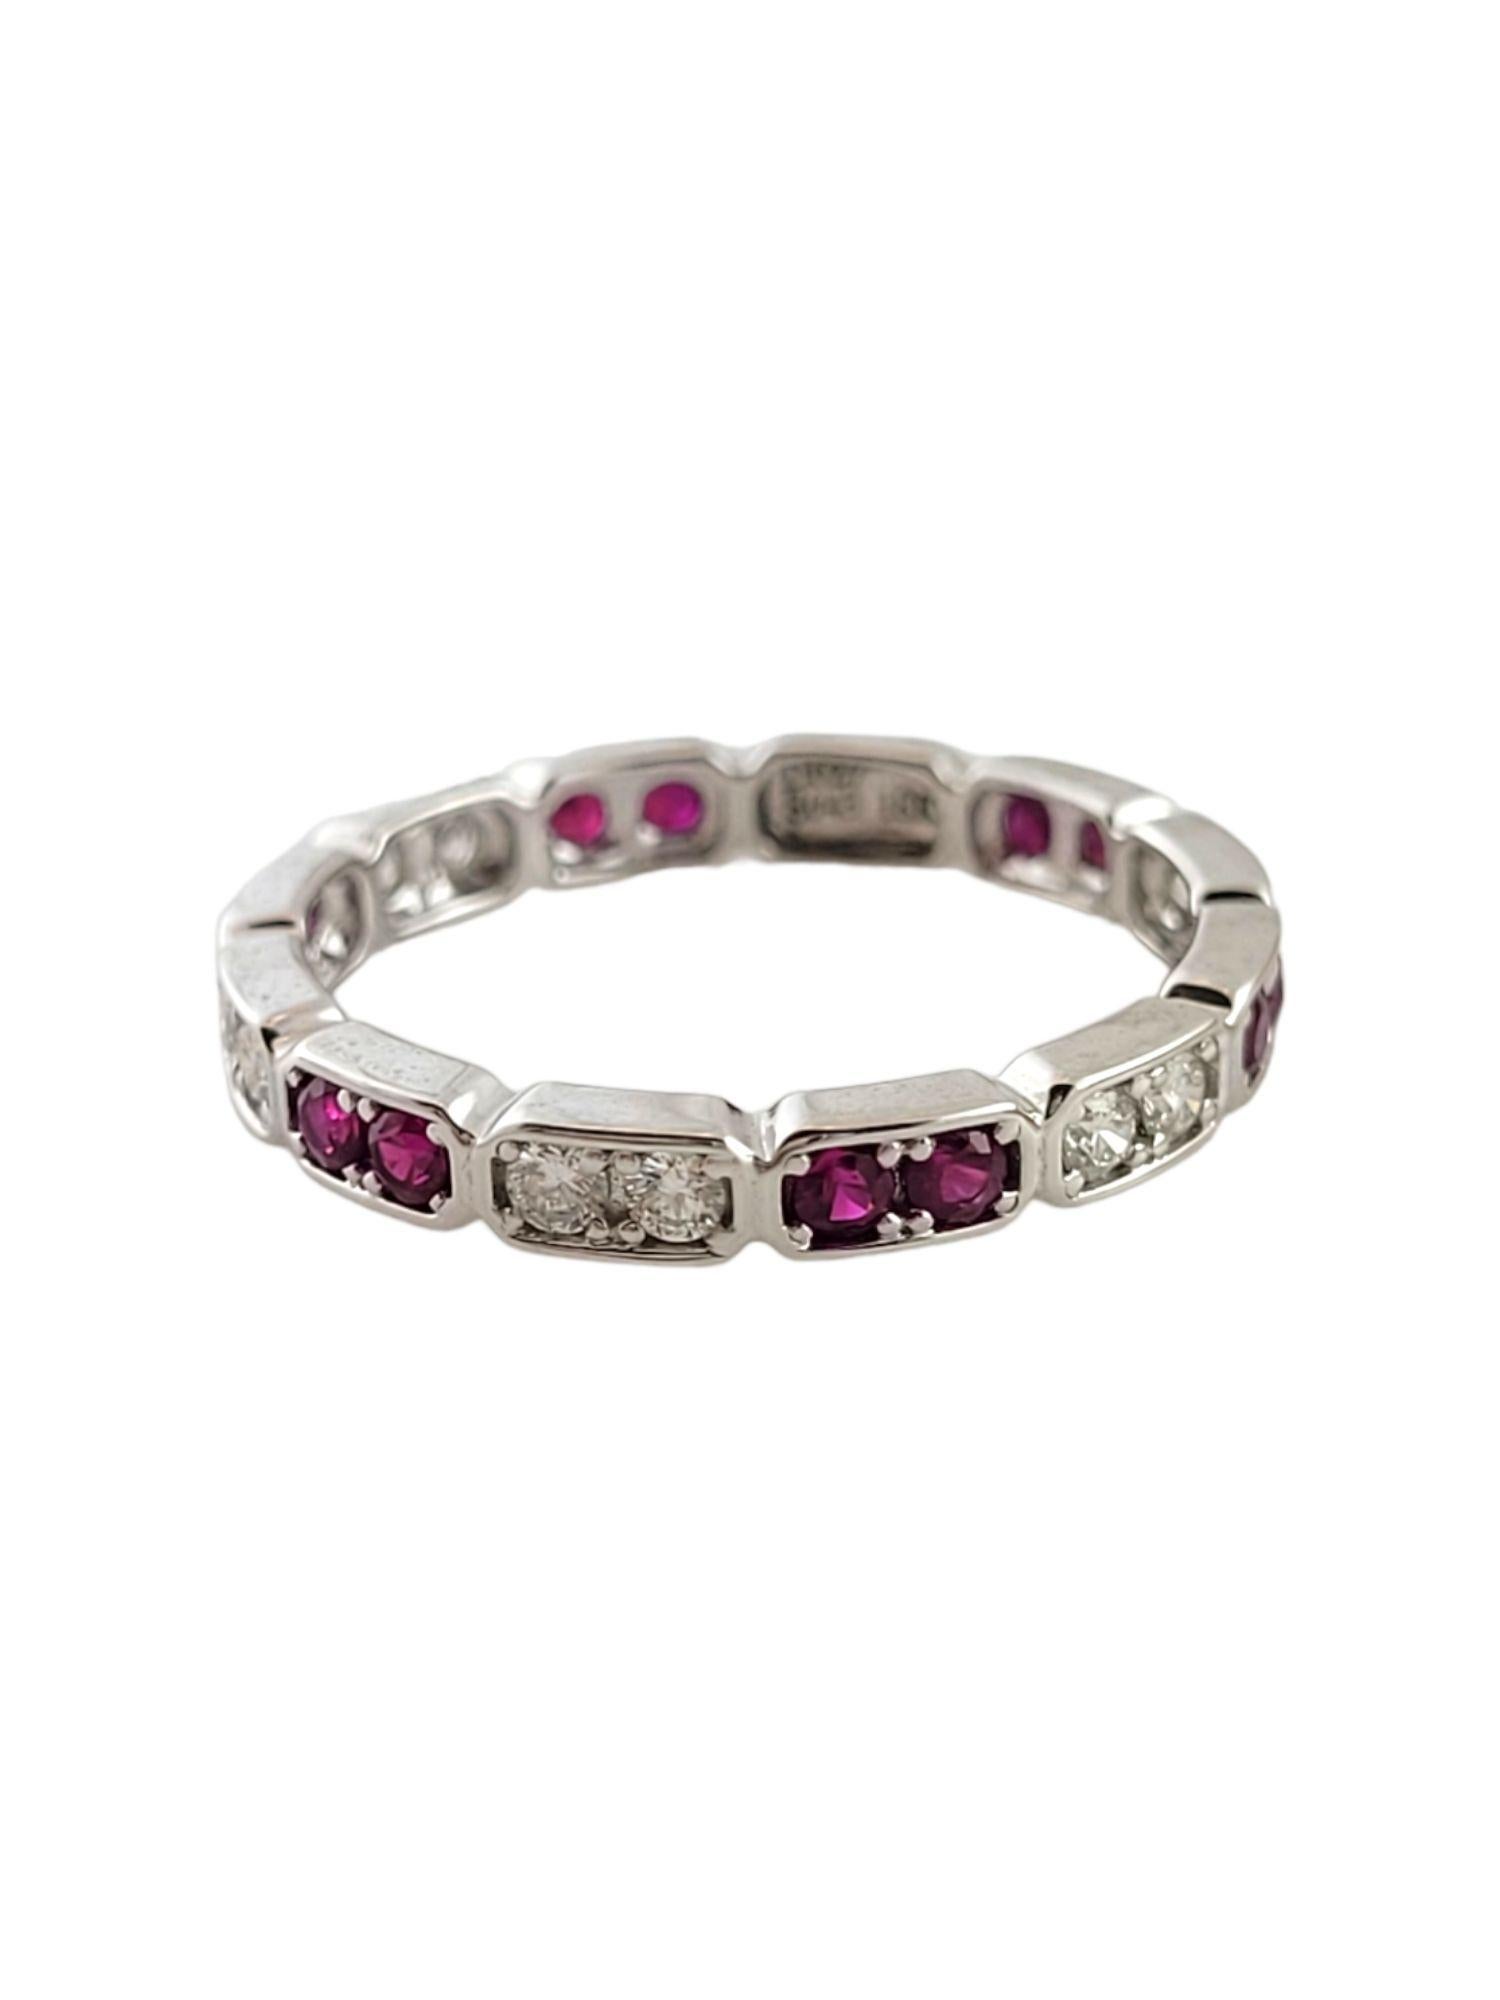 Round Cut 18K White Gold Diamond & Ruby Eternity Band Size 6.75 #14773 For Sale